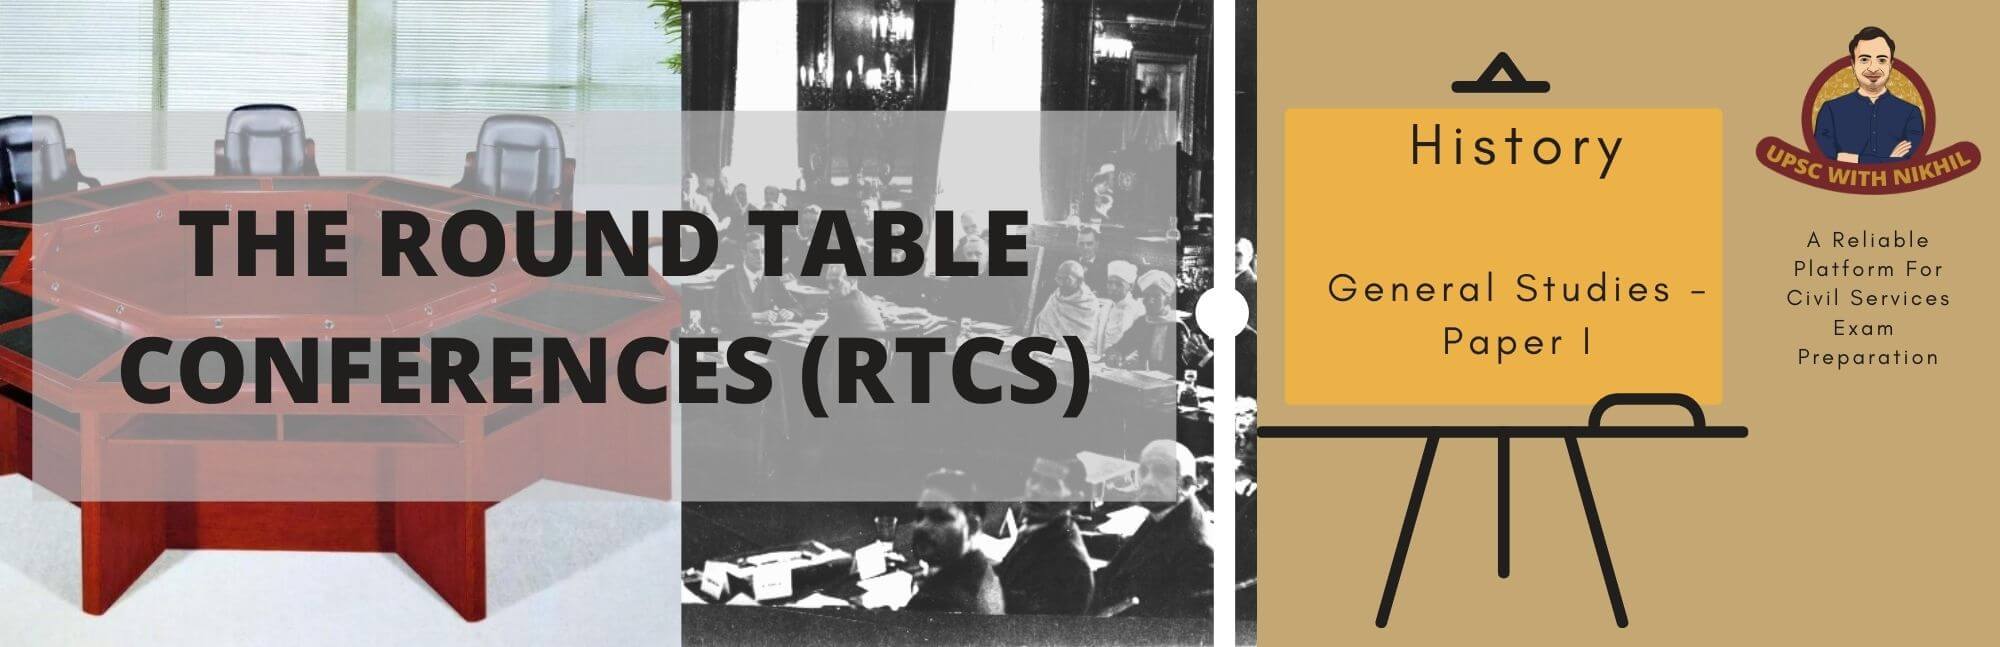 The Round Table Conferences Rtcs, Where The First Round Table Conference Was Held